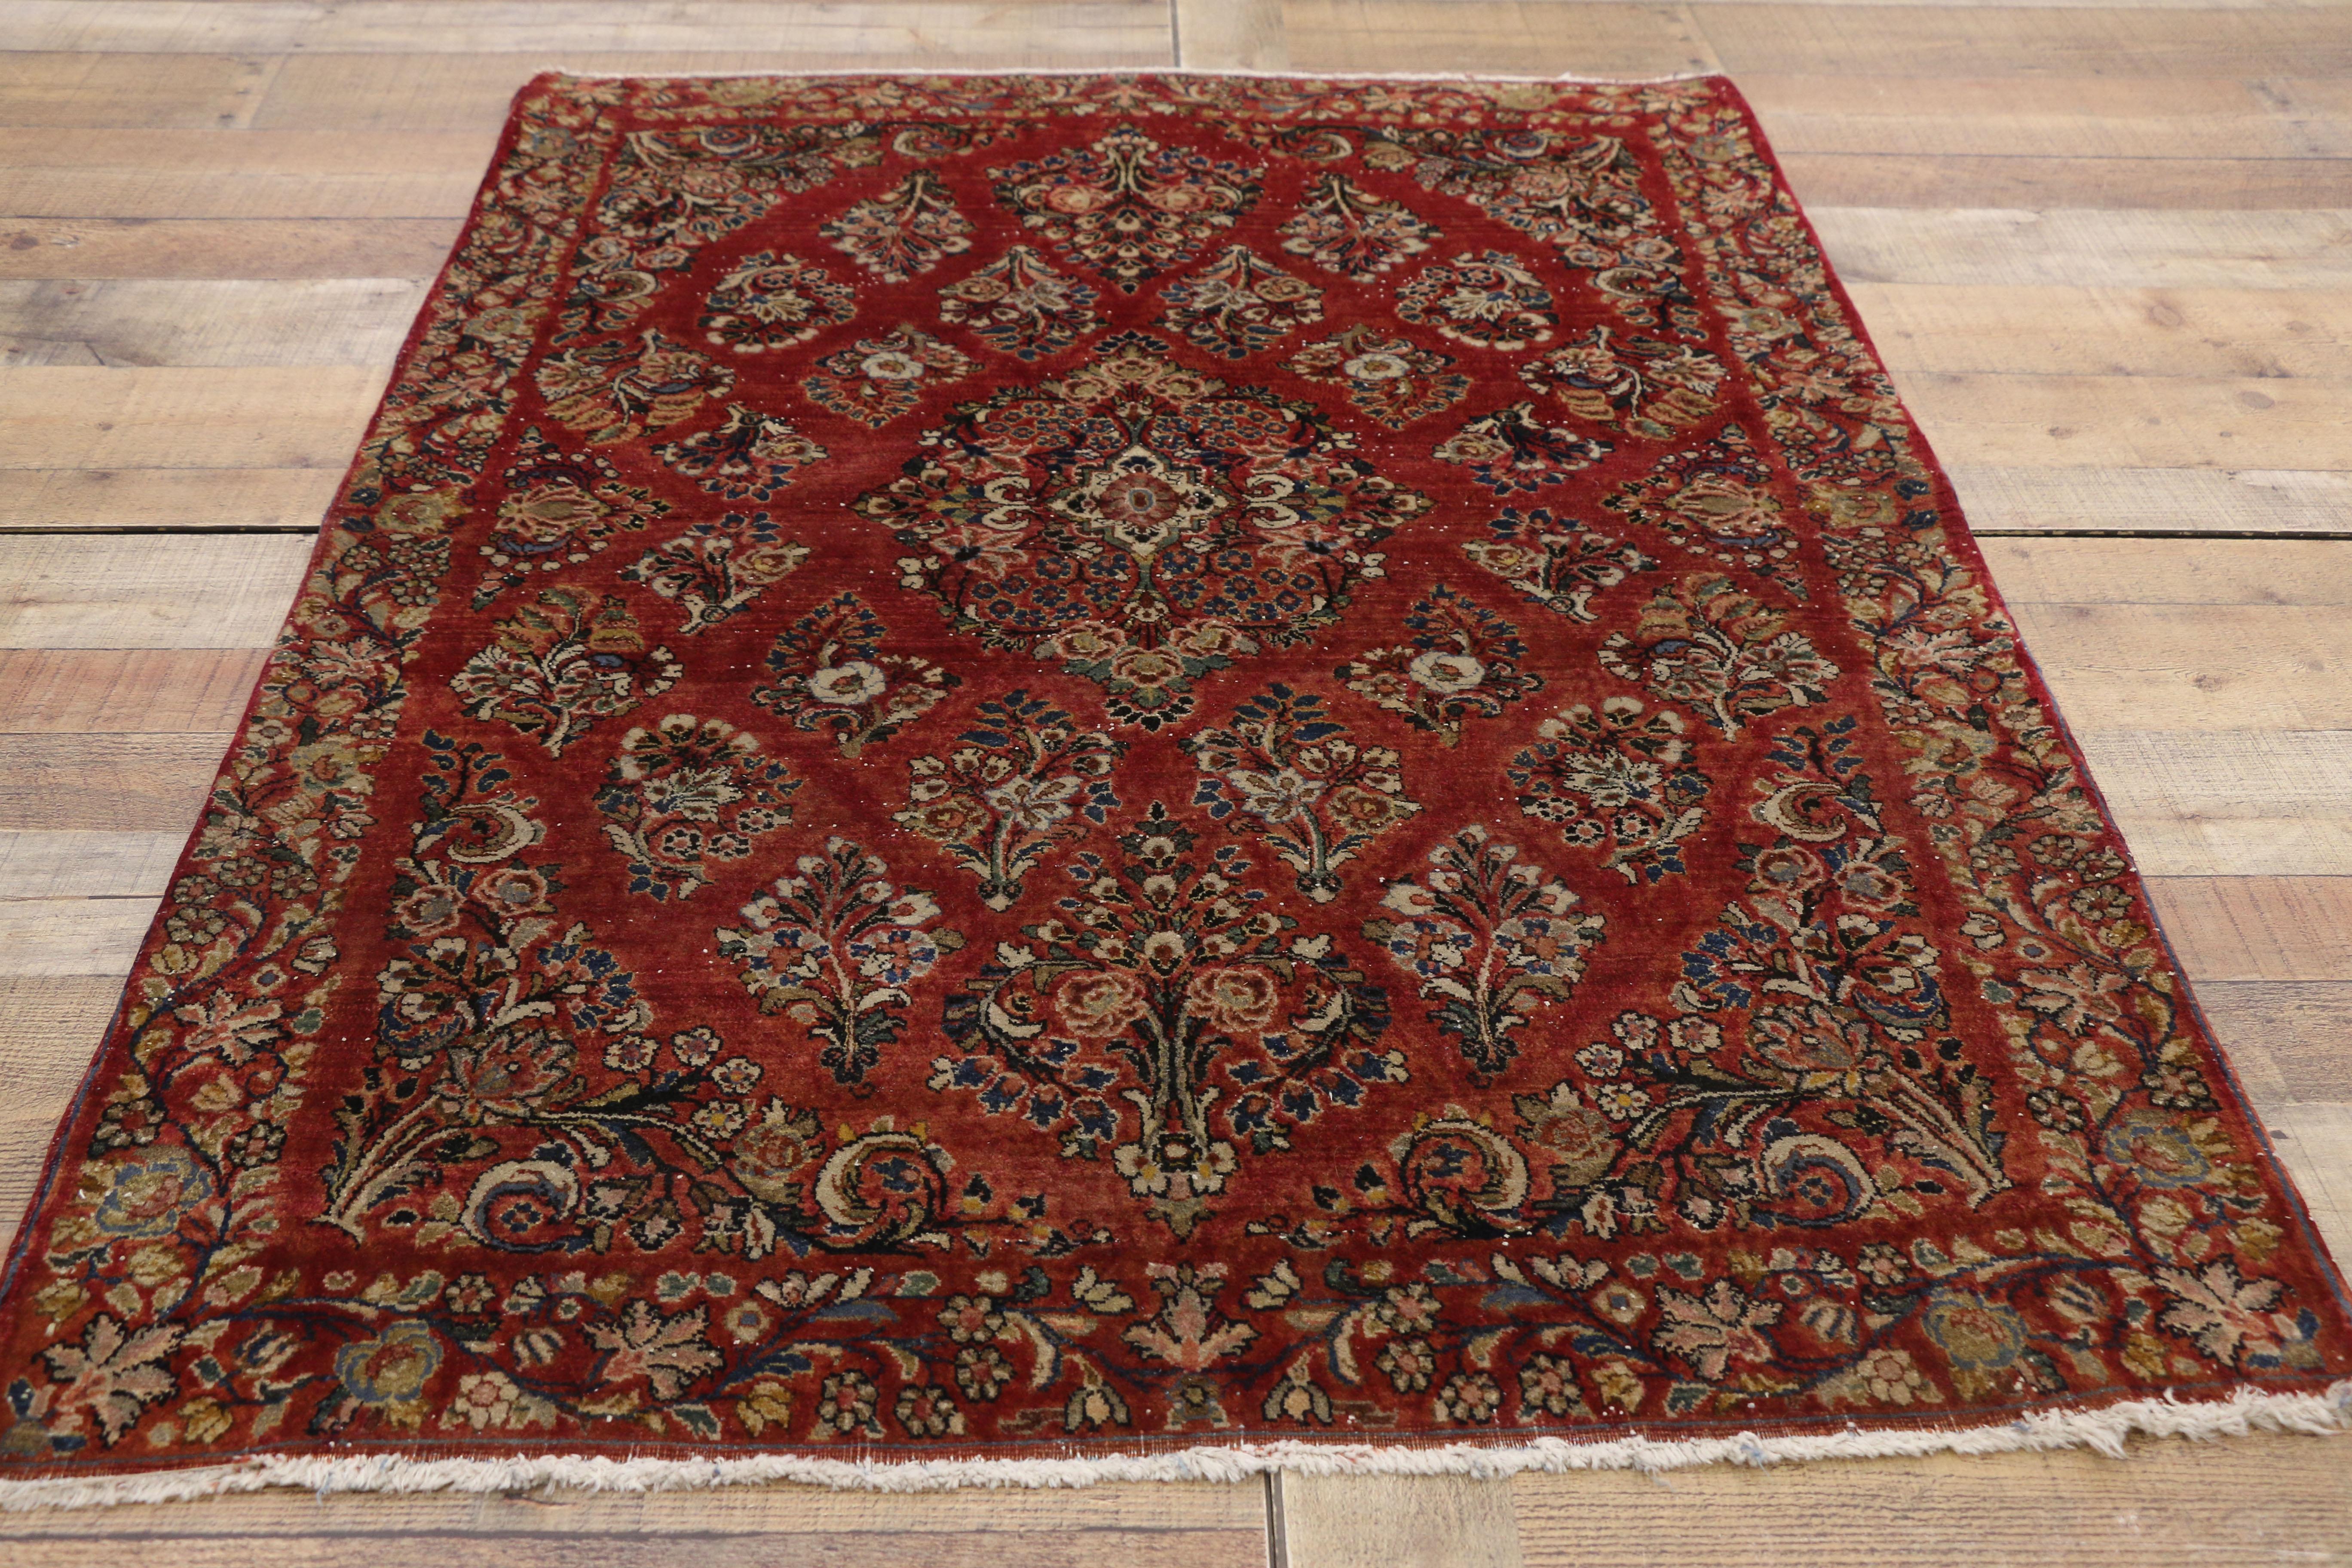 Wool Antique Sarouk Persian Rug with Old World Victorian Style